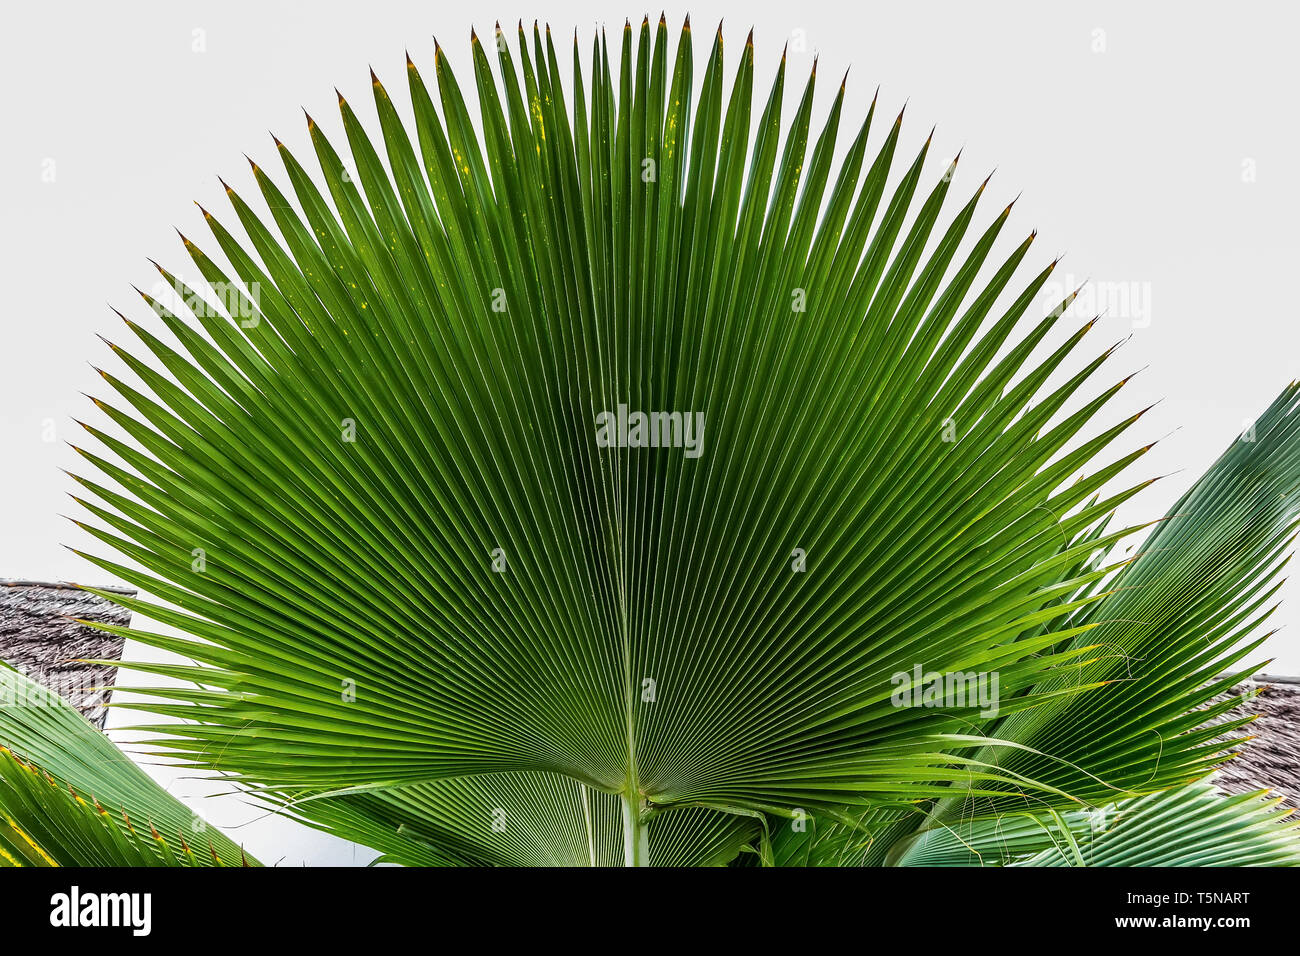 Large semicircular green palm leaf on a white background. Stock Photo